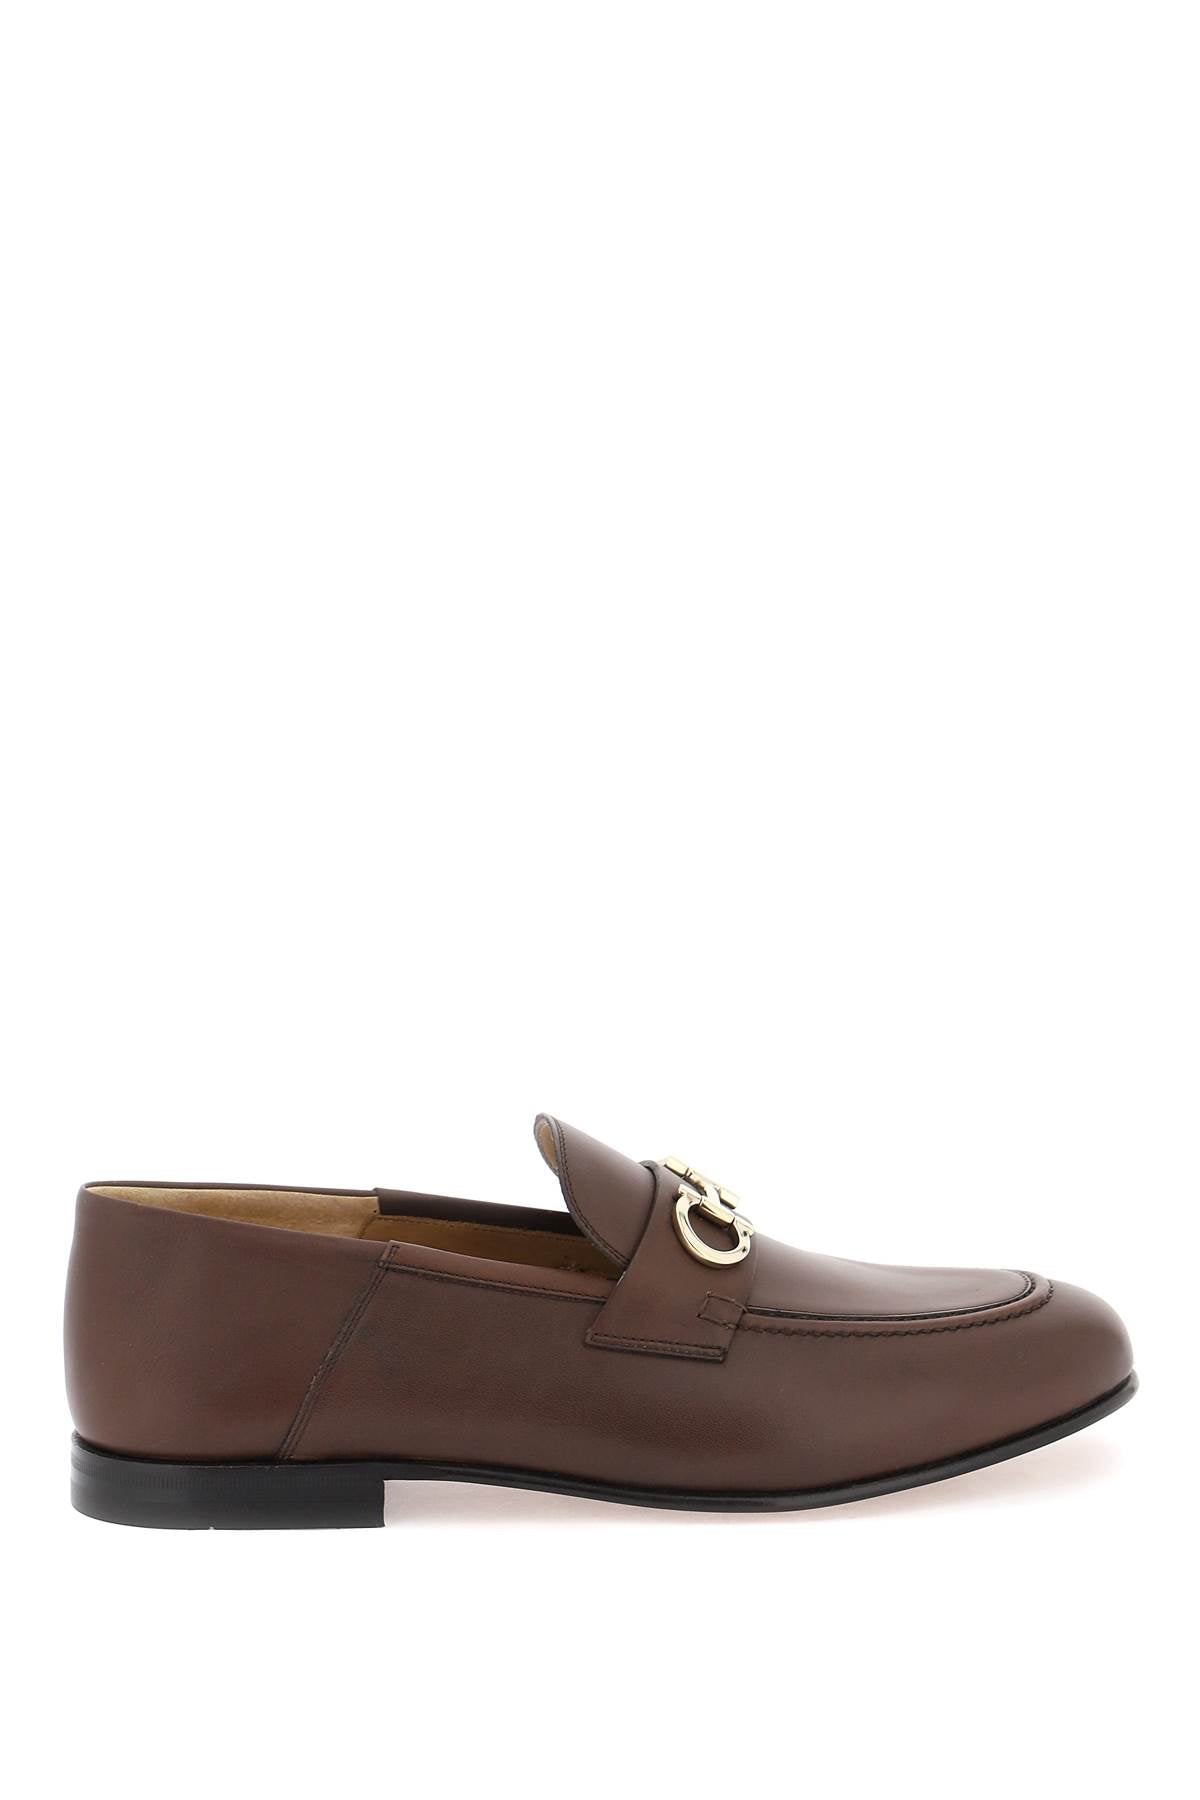 FERRAGAMO Smooth Leather Loafers with Iconic Gold Gancini Hook Detail